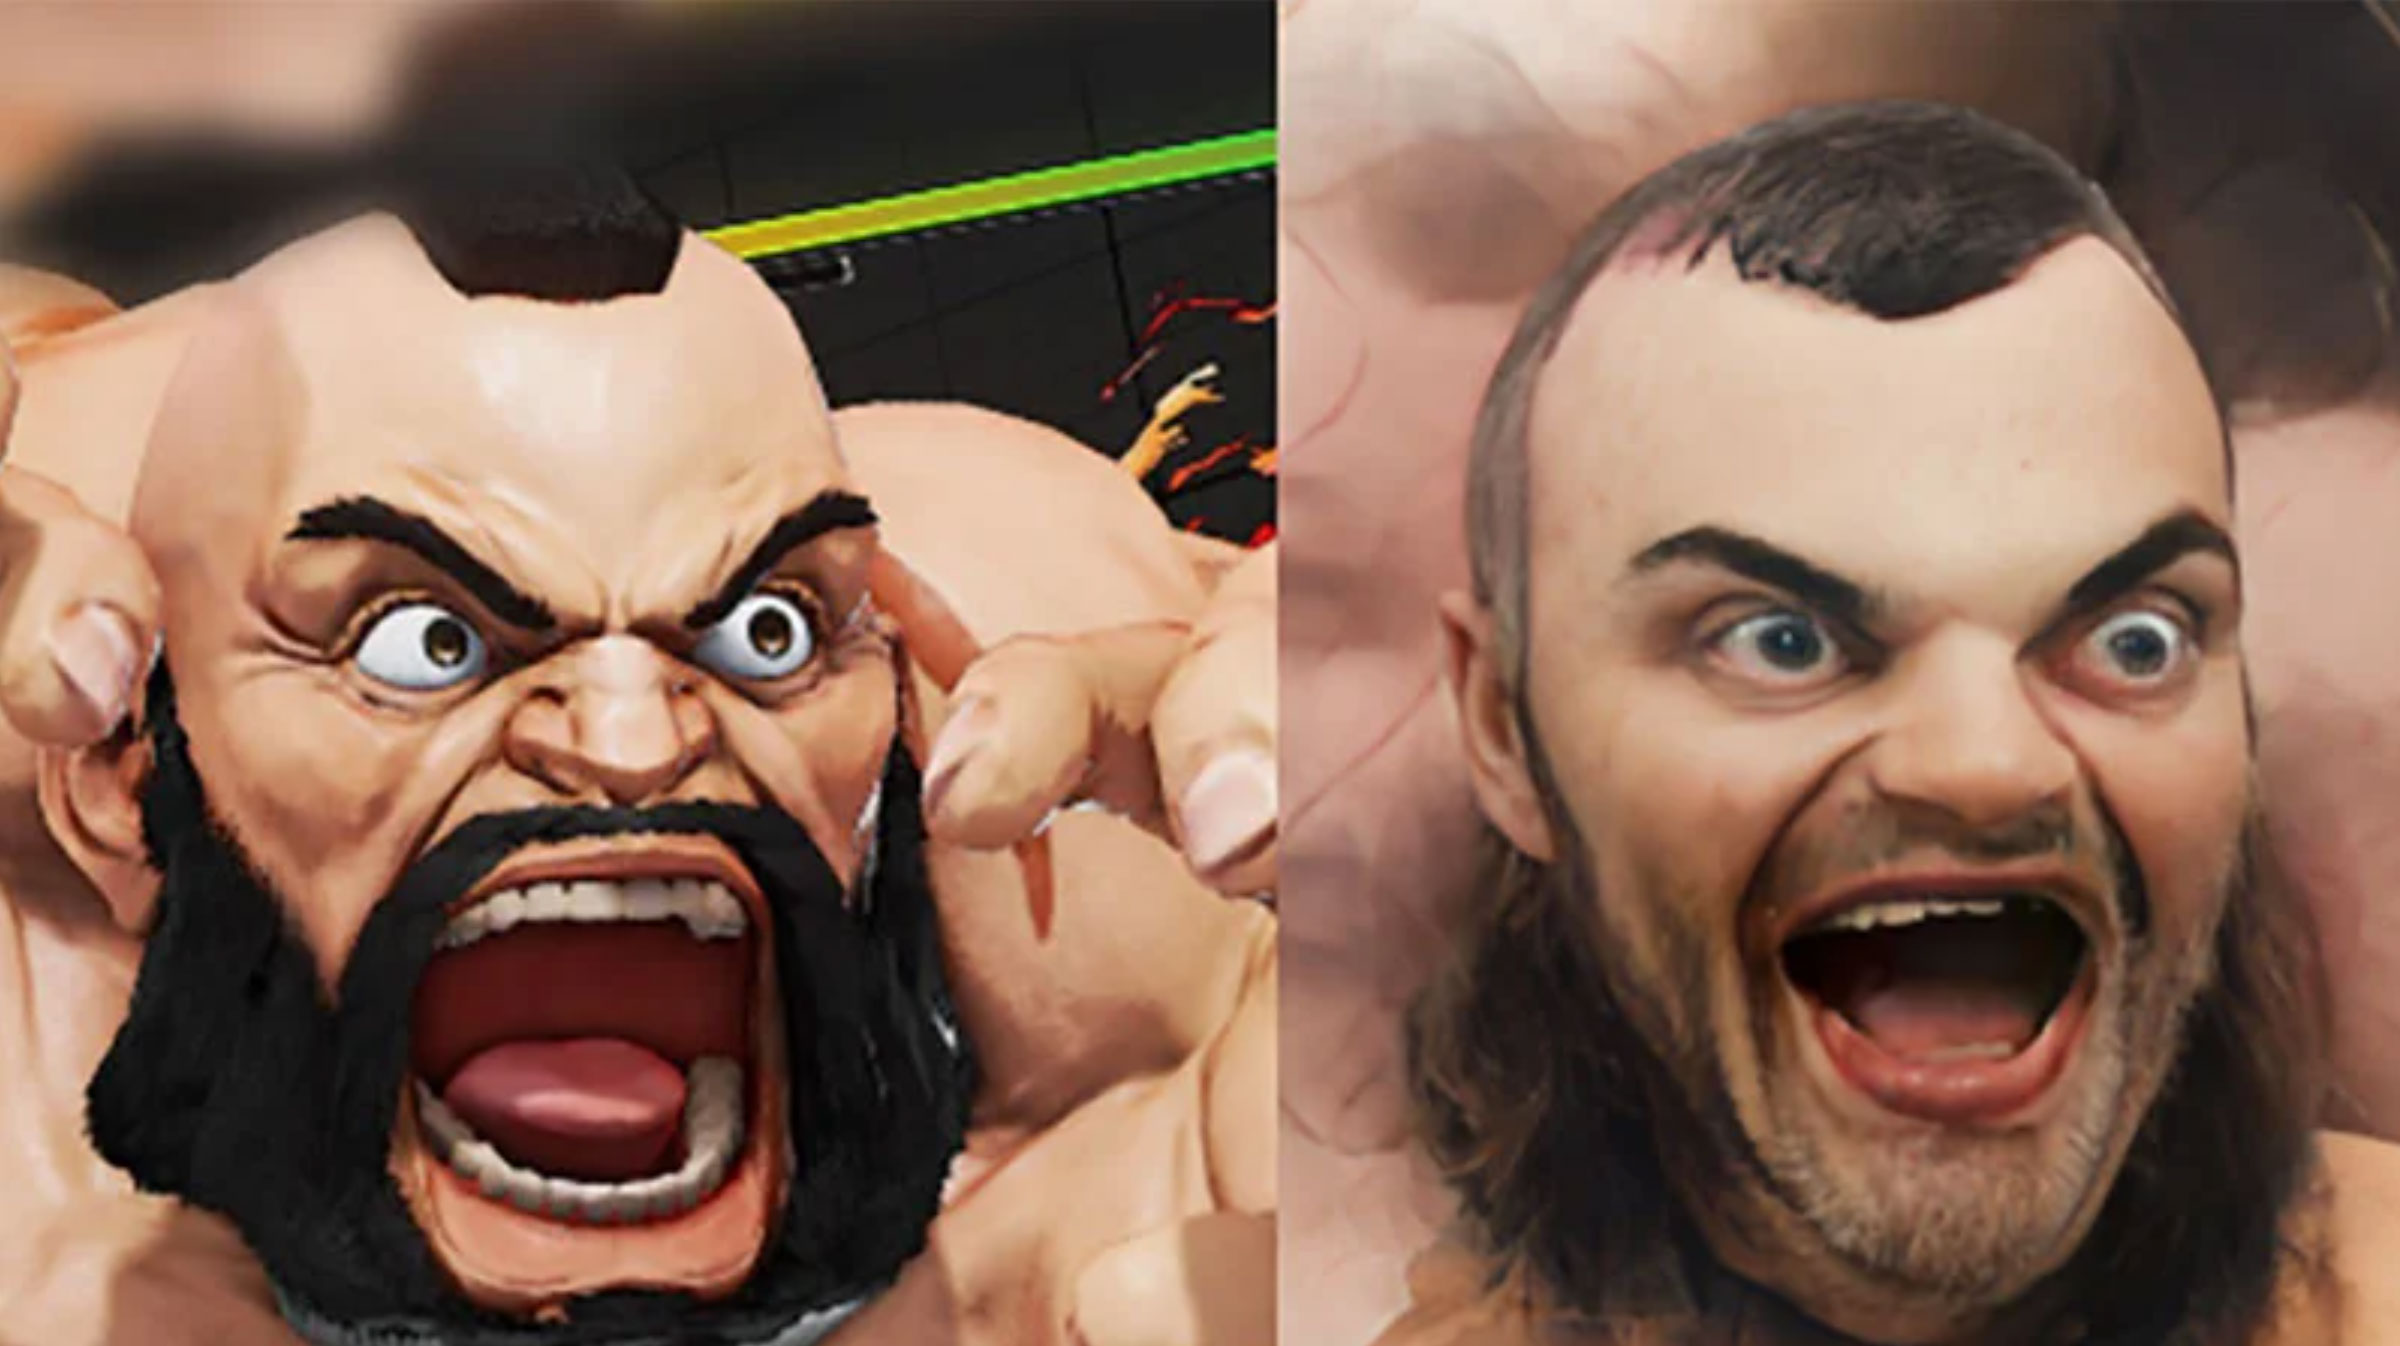 realistic video game characters - Zangief (Street Fighter)